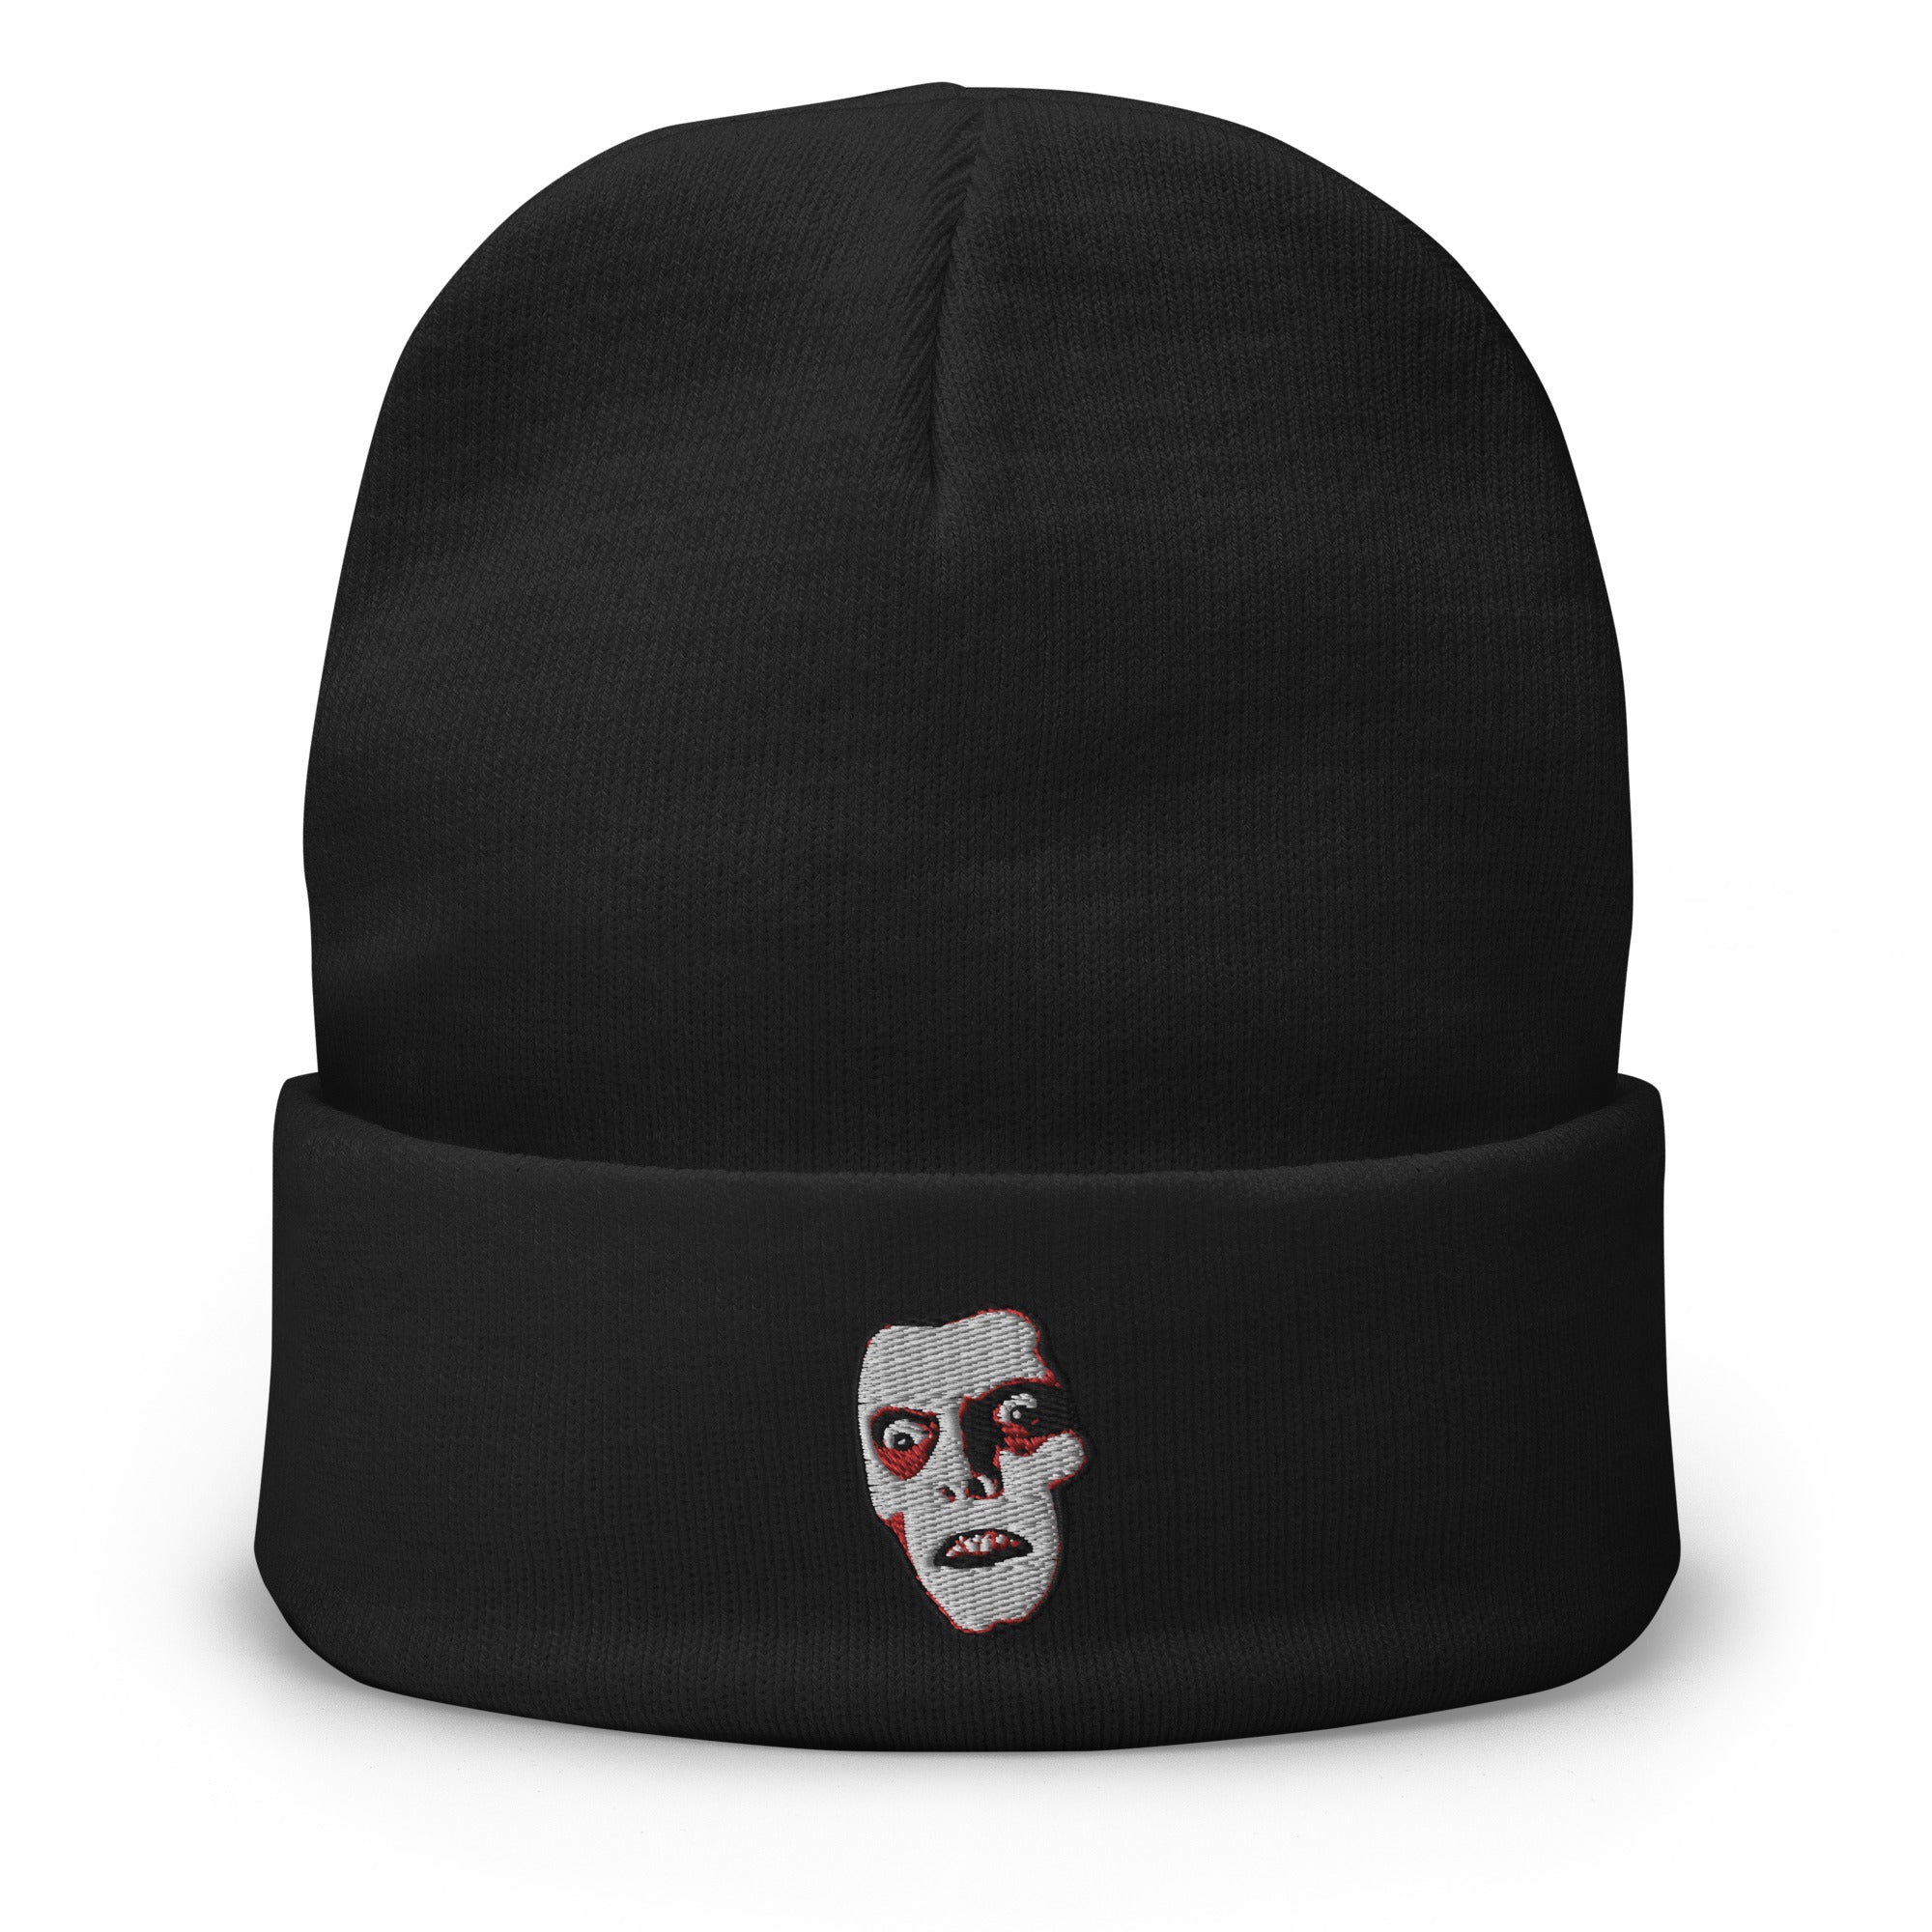 Horror Monster Pazuzu "Captain Howdy" Embroidered Cuff Beanie The Exorcist - Edge of Life Designs